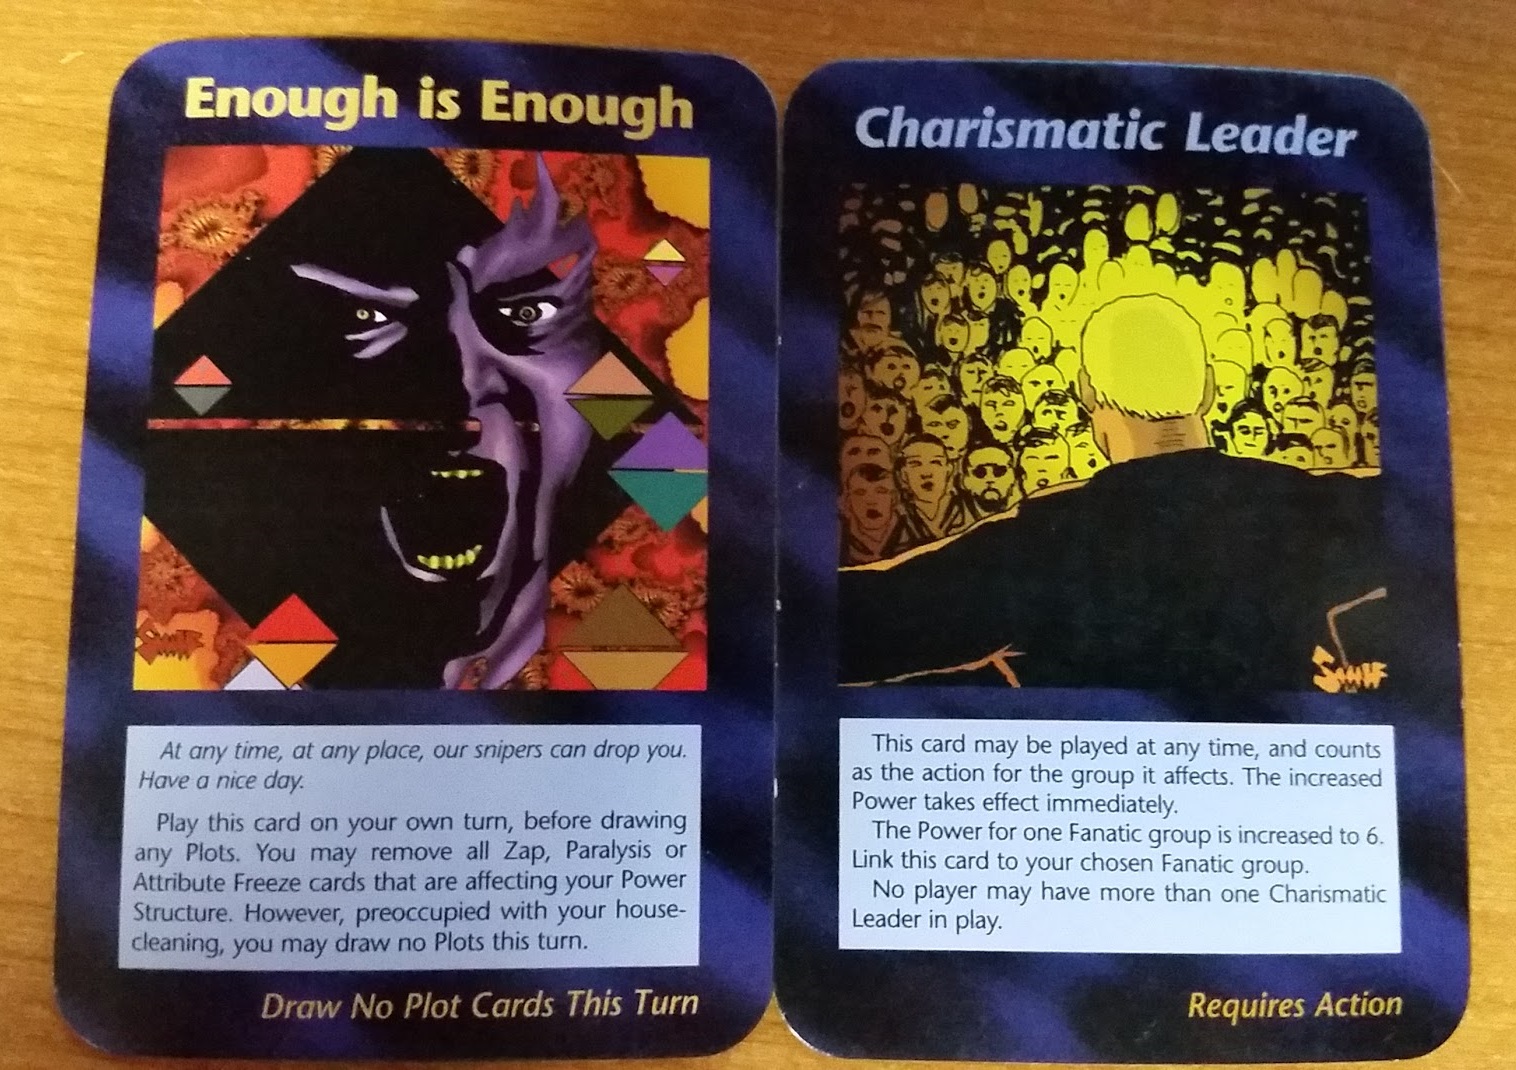 Oh the Irony—Illuminati Card Game Continues to Inspire Conspiracy Theorists